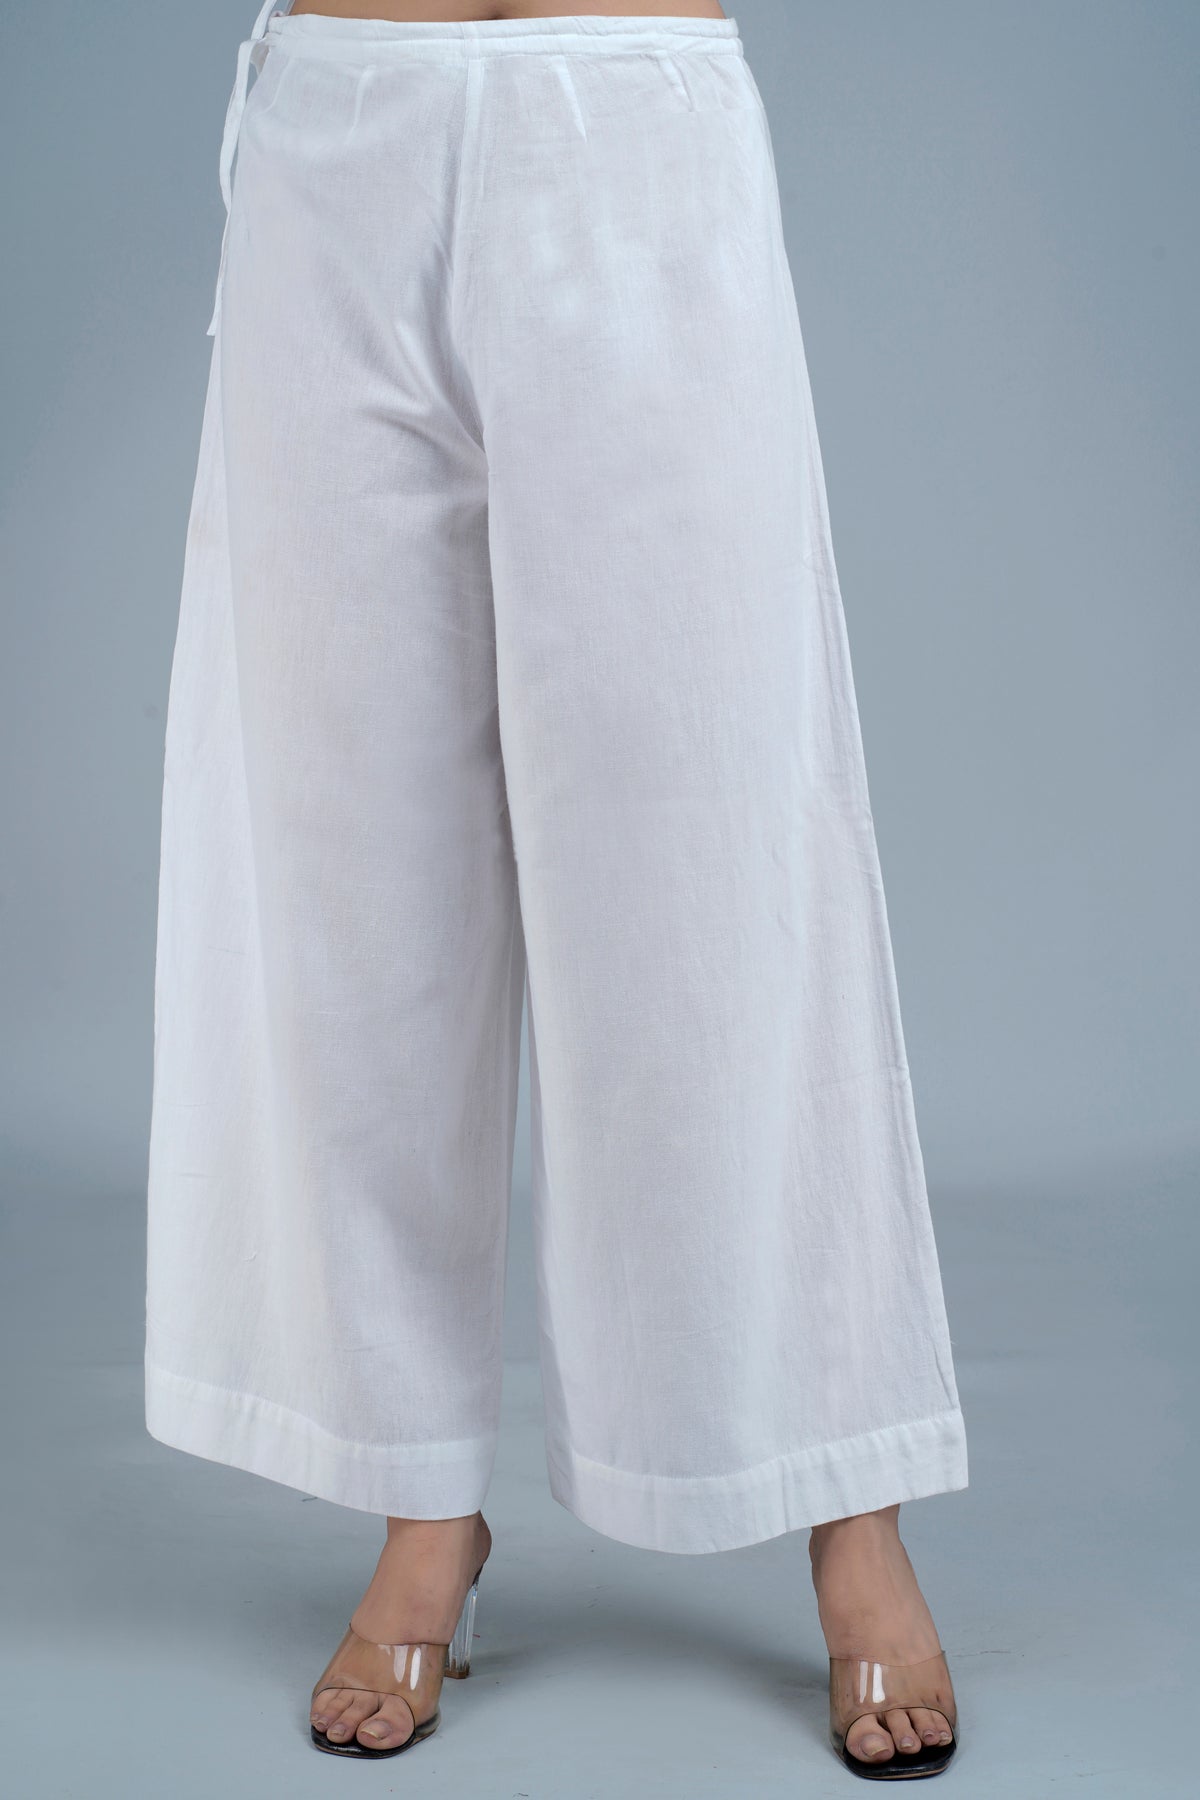 TULYA Women's Pure Cotton Wide Pants: Made to Order and Customizable